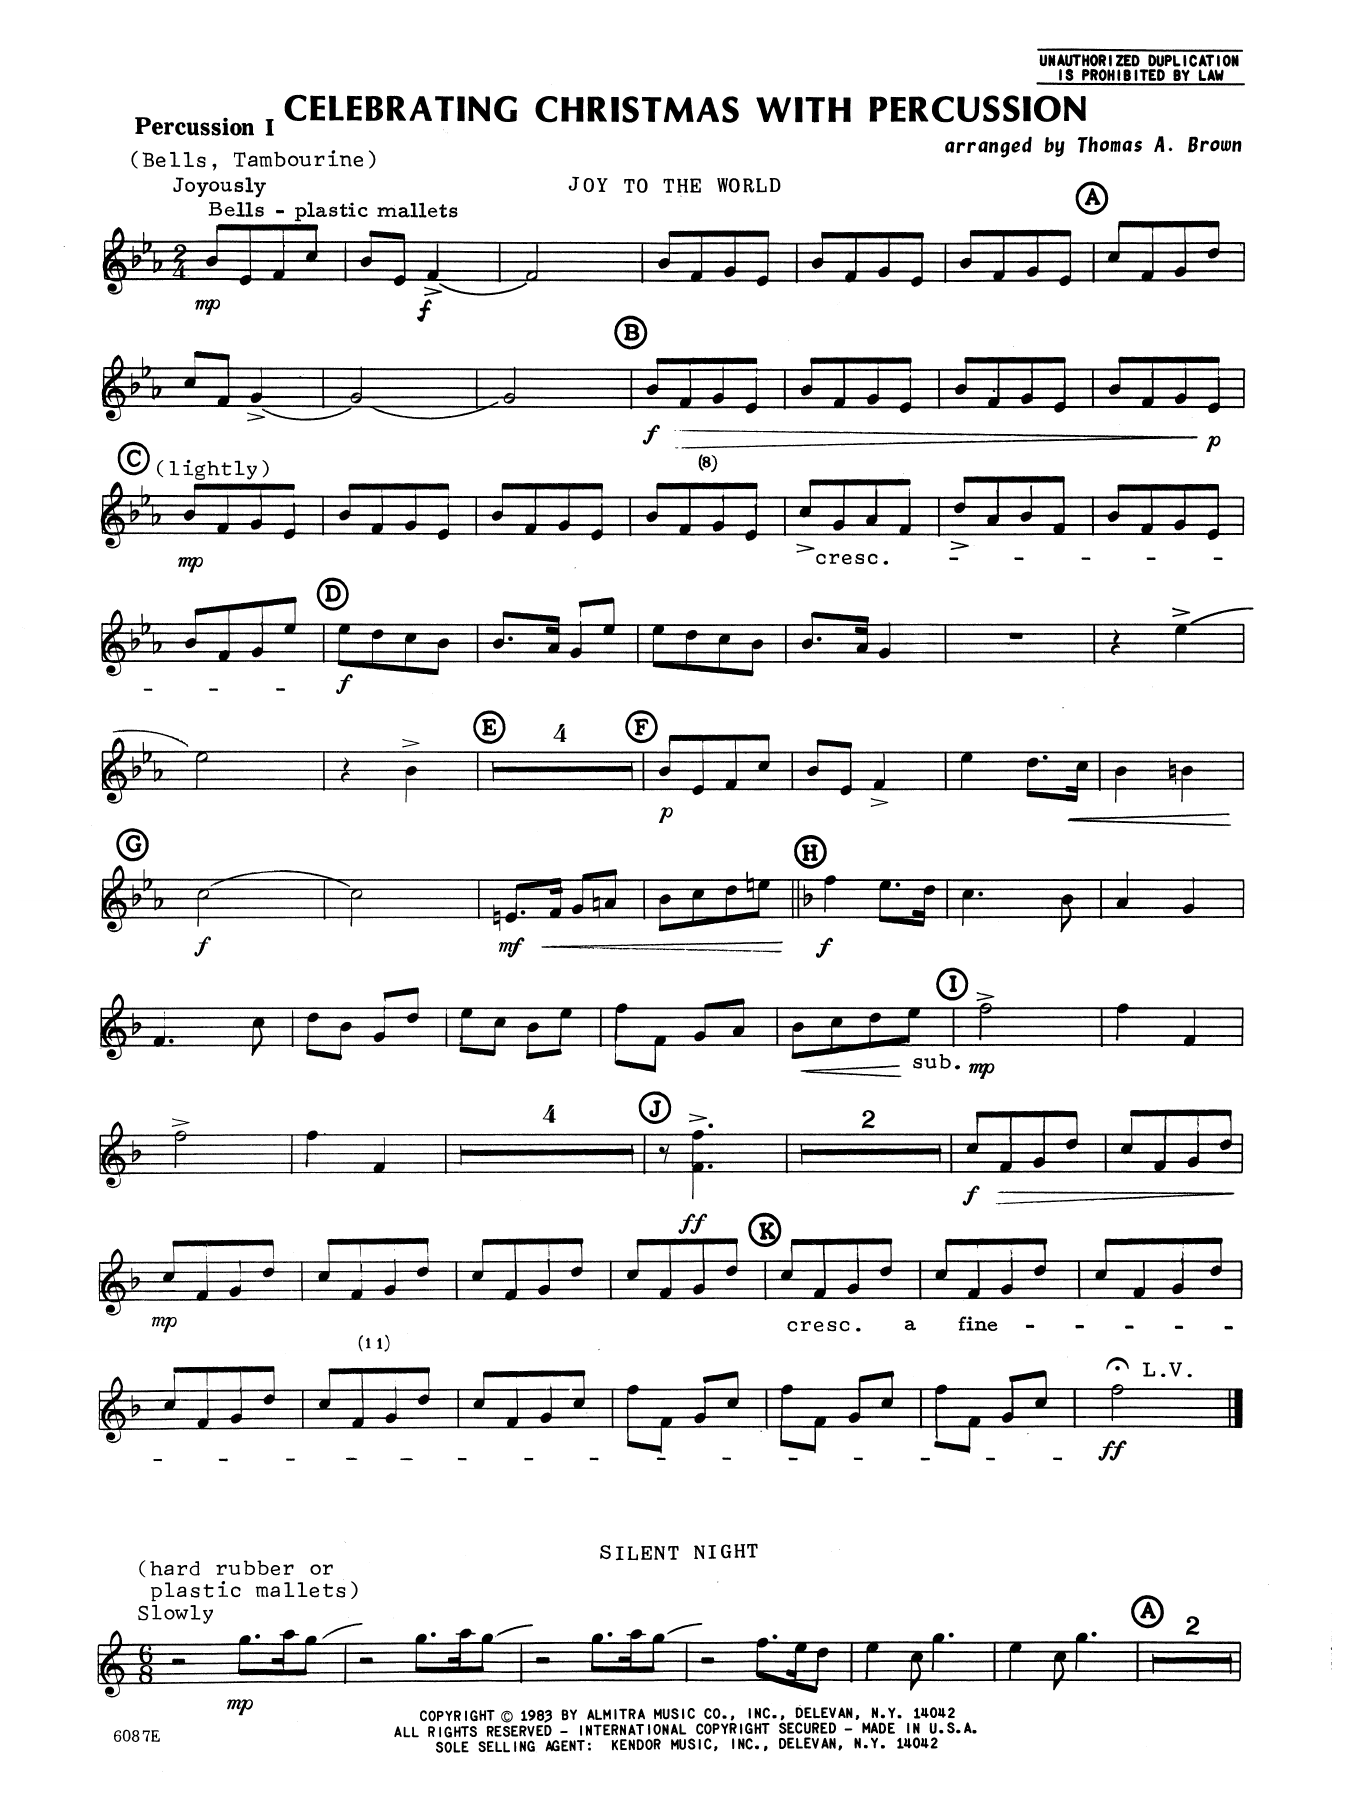 Download Tom Brown Celebrating Christmas With Percussion, Sheet Music